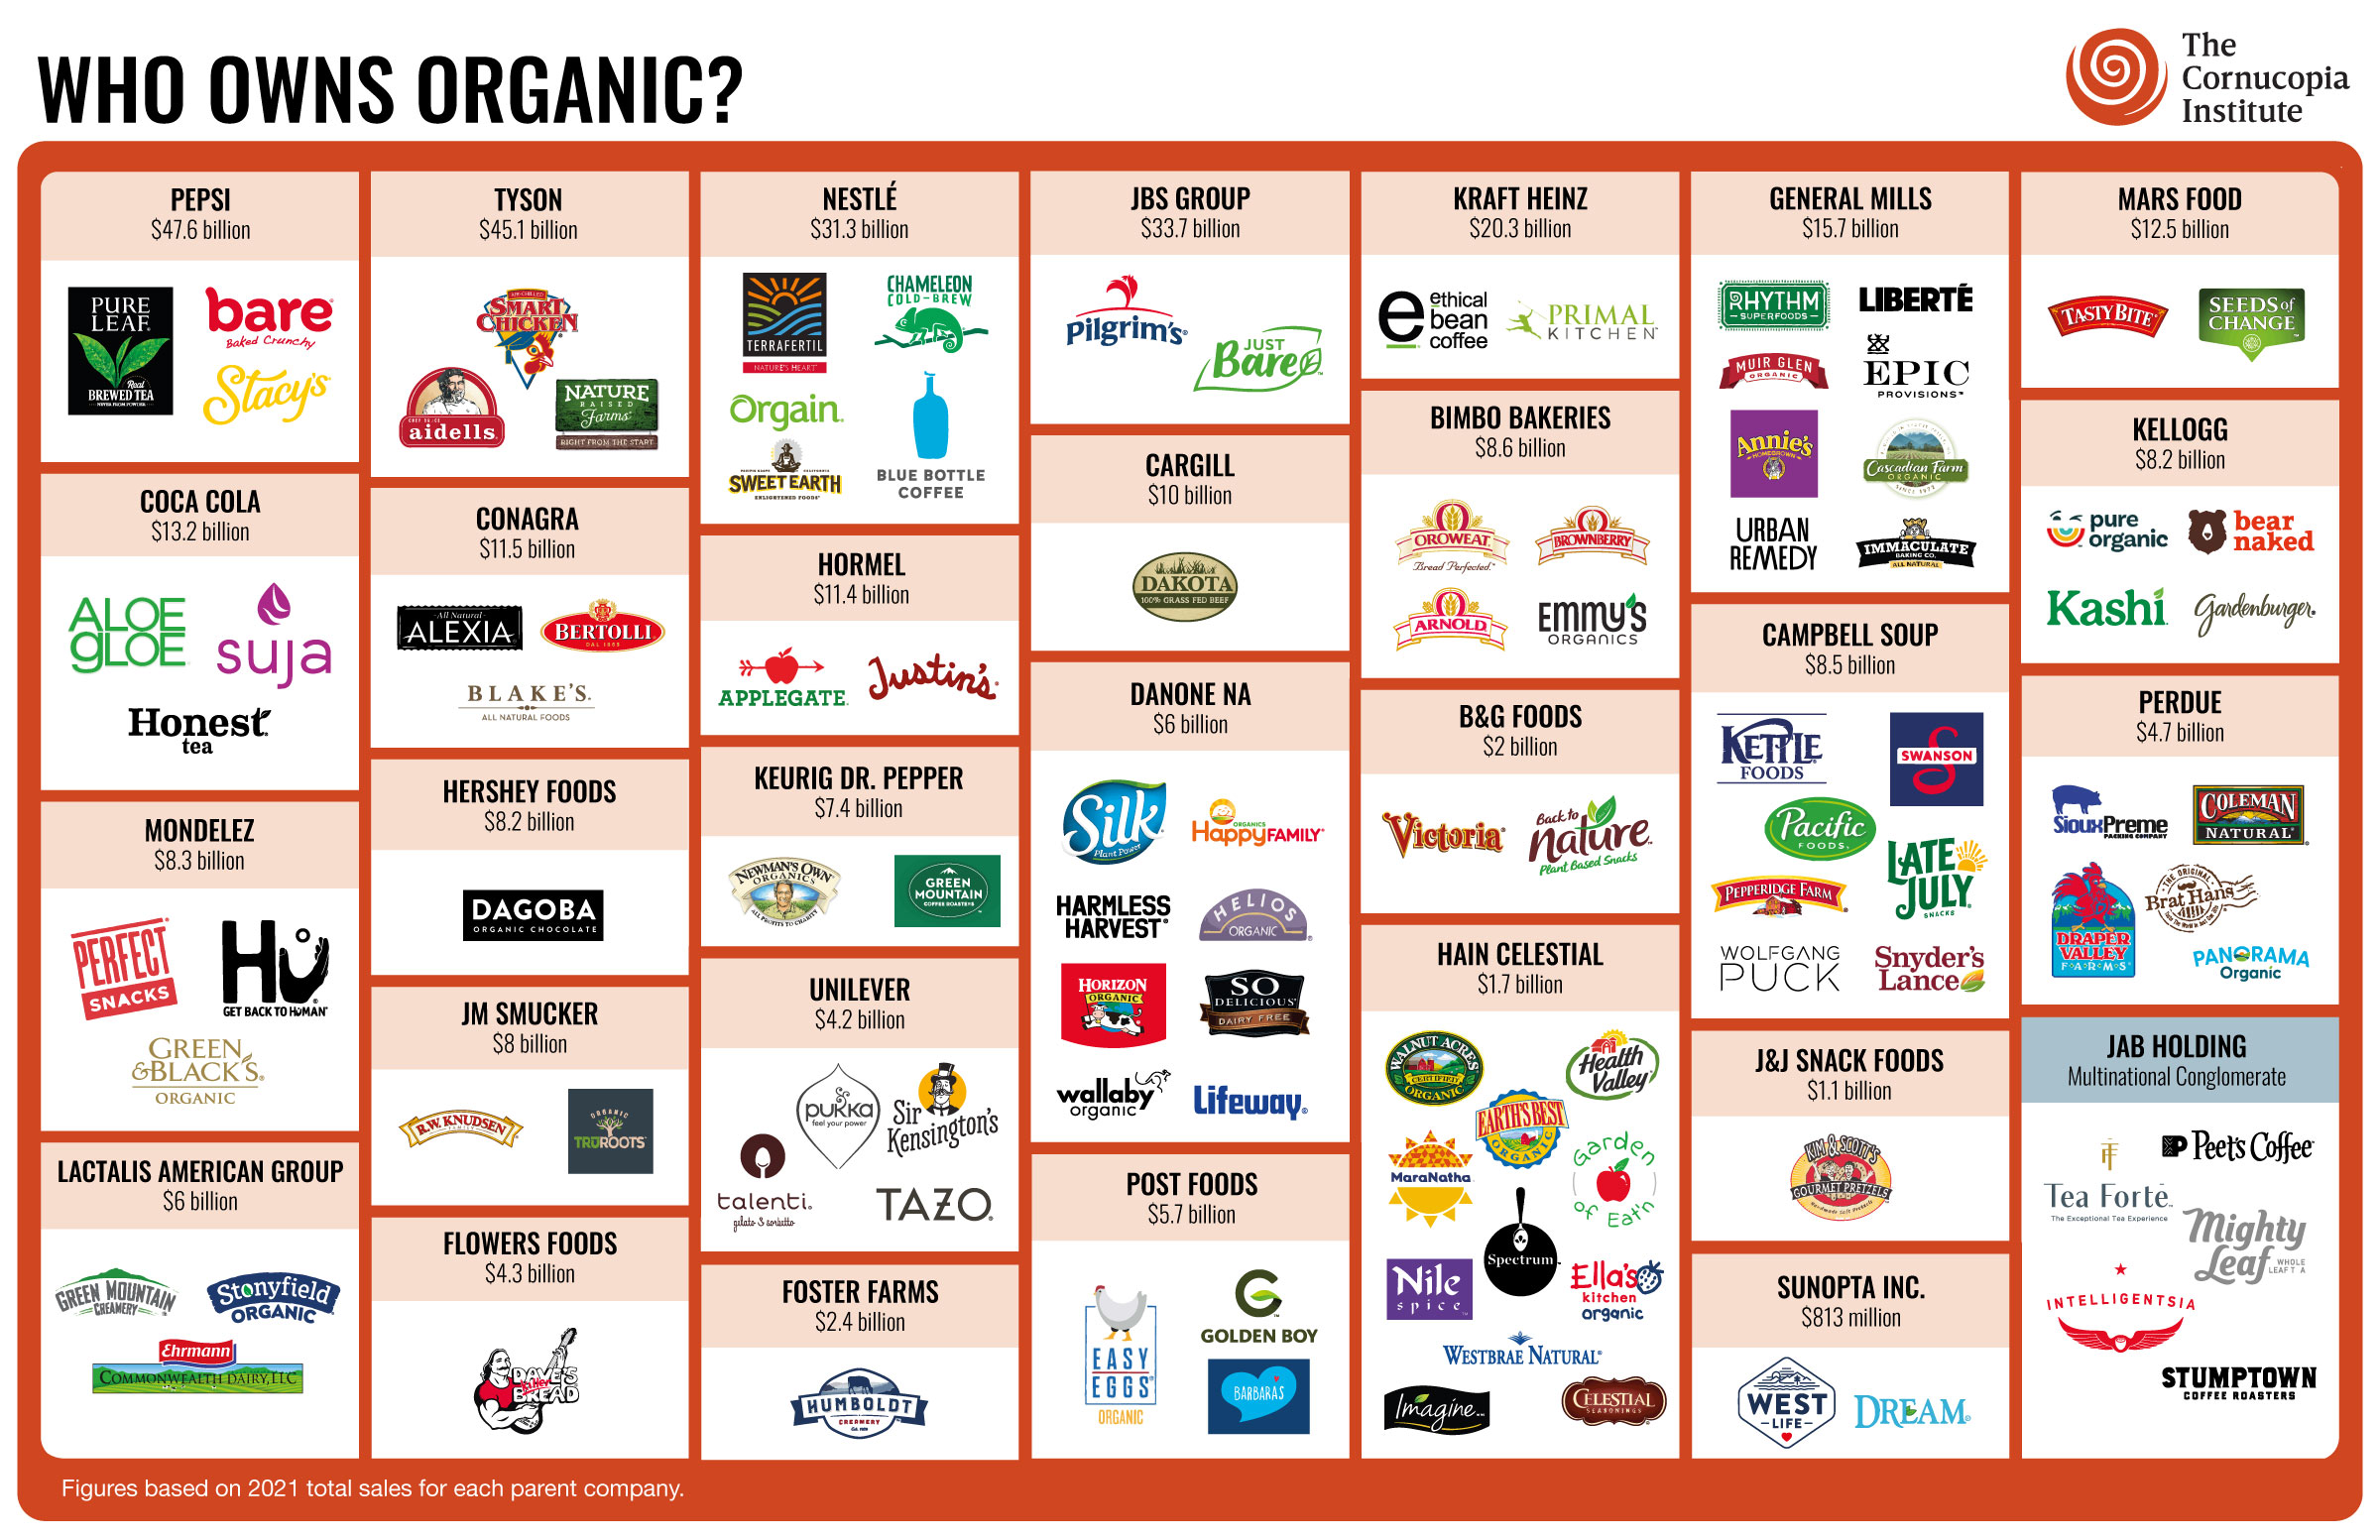 Independent Organic Brands - An infographic showing the logos of independently owned organic brands